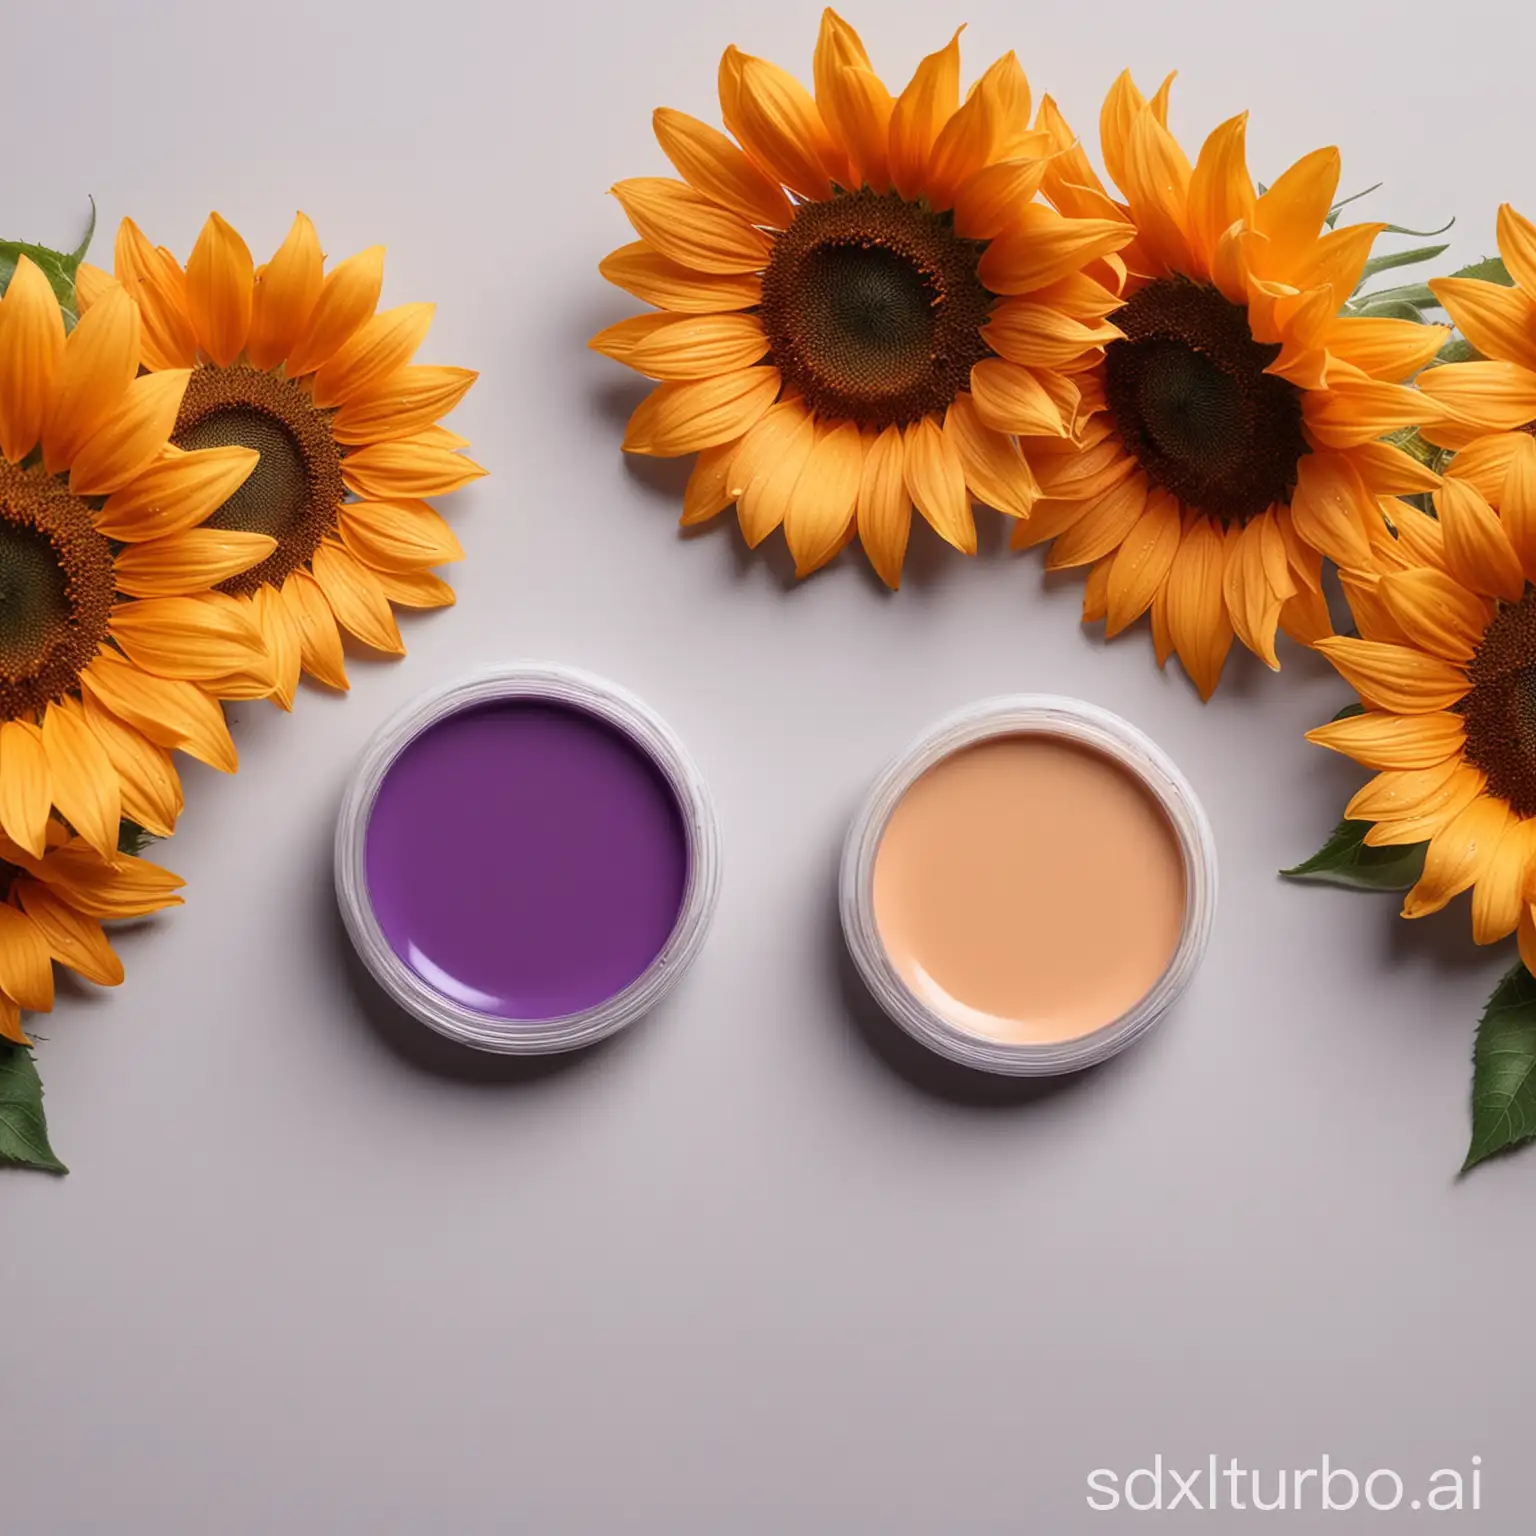 Multicolored-Makeup-Composition-with-Sunflower-on-White-Background